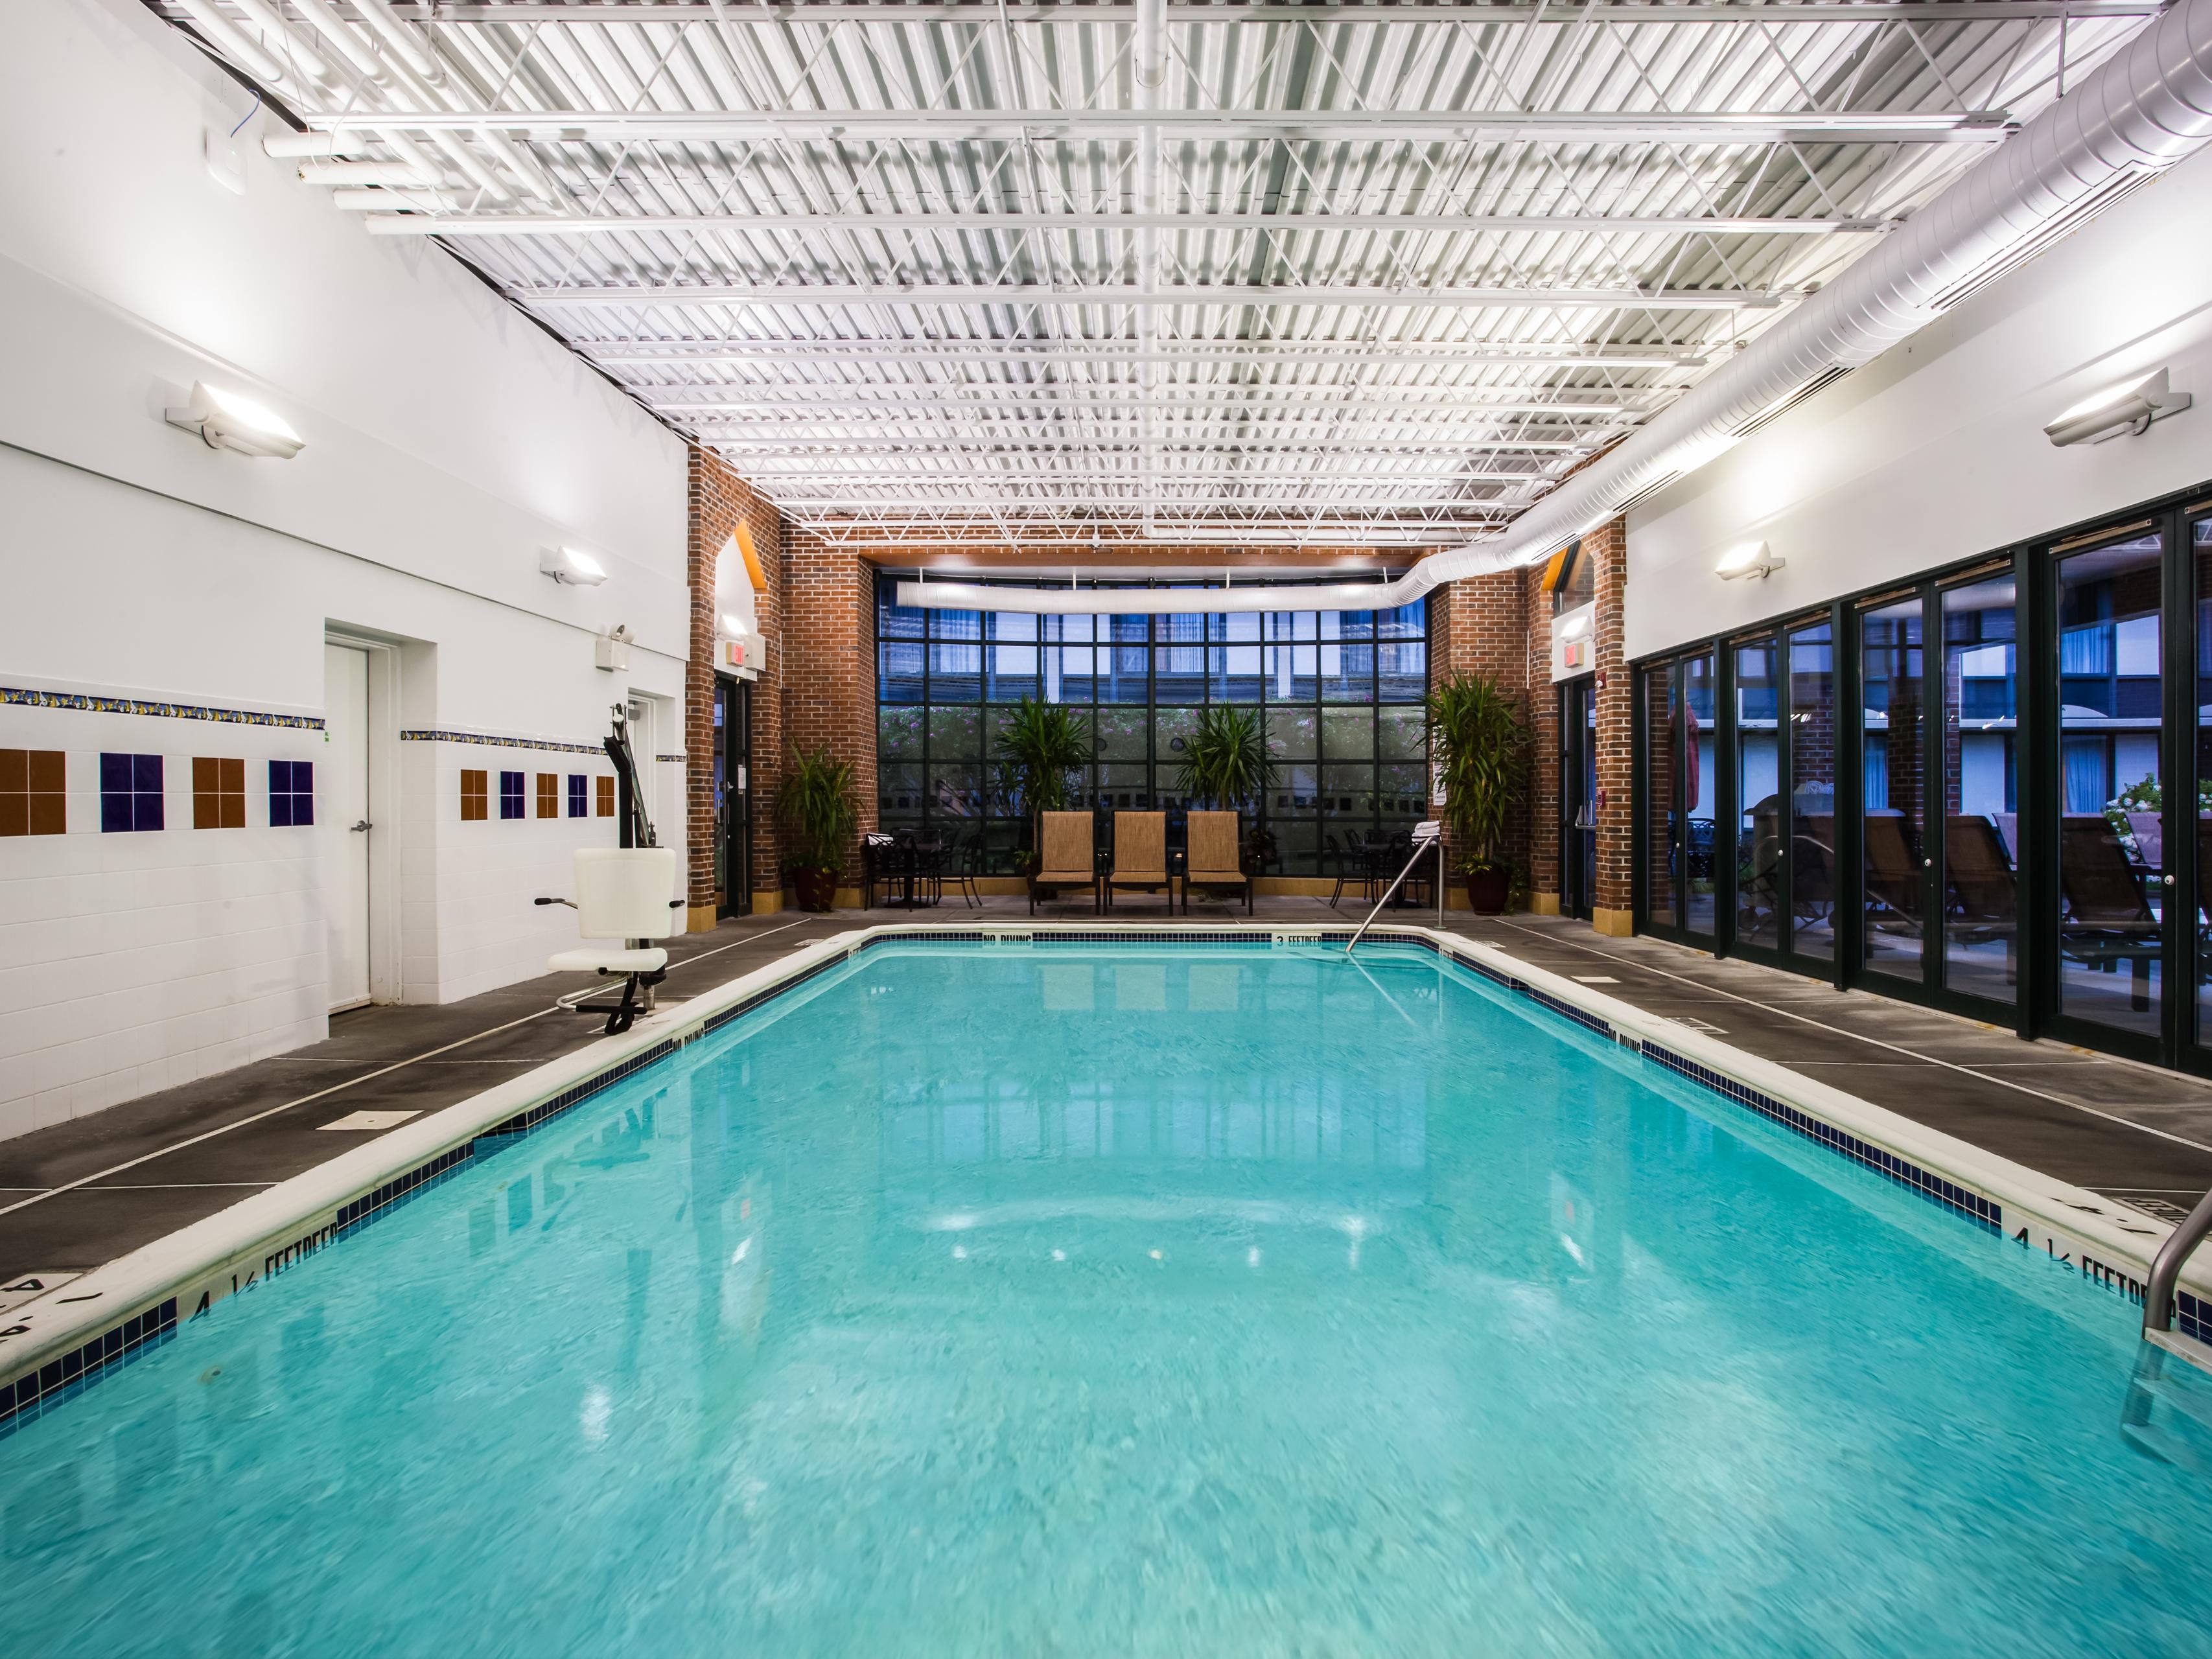 Enjoy a dip in our indoor pool during your next visit! Open daily from 6am until 10pm. 